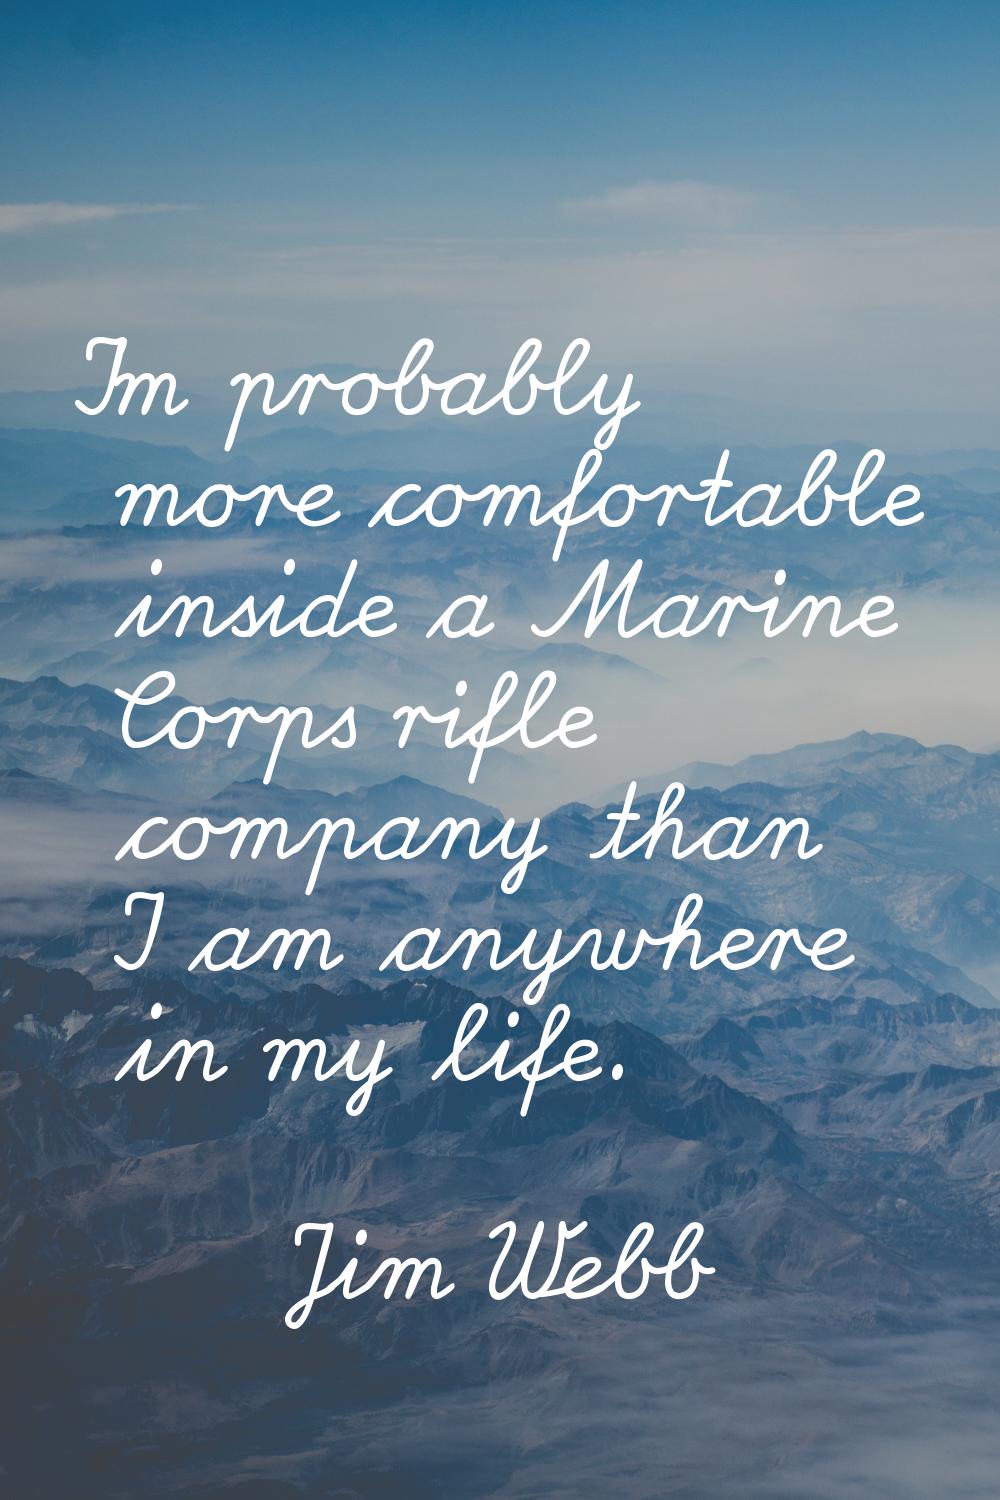 I'm probably more comfortable inside a Marine Corps rifle company than I am anywhere in my life.